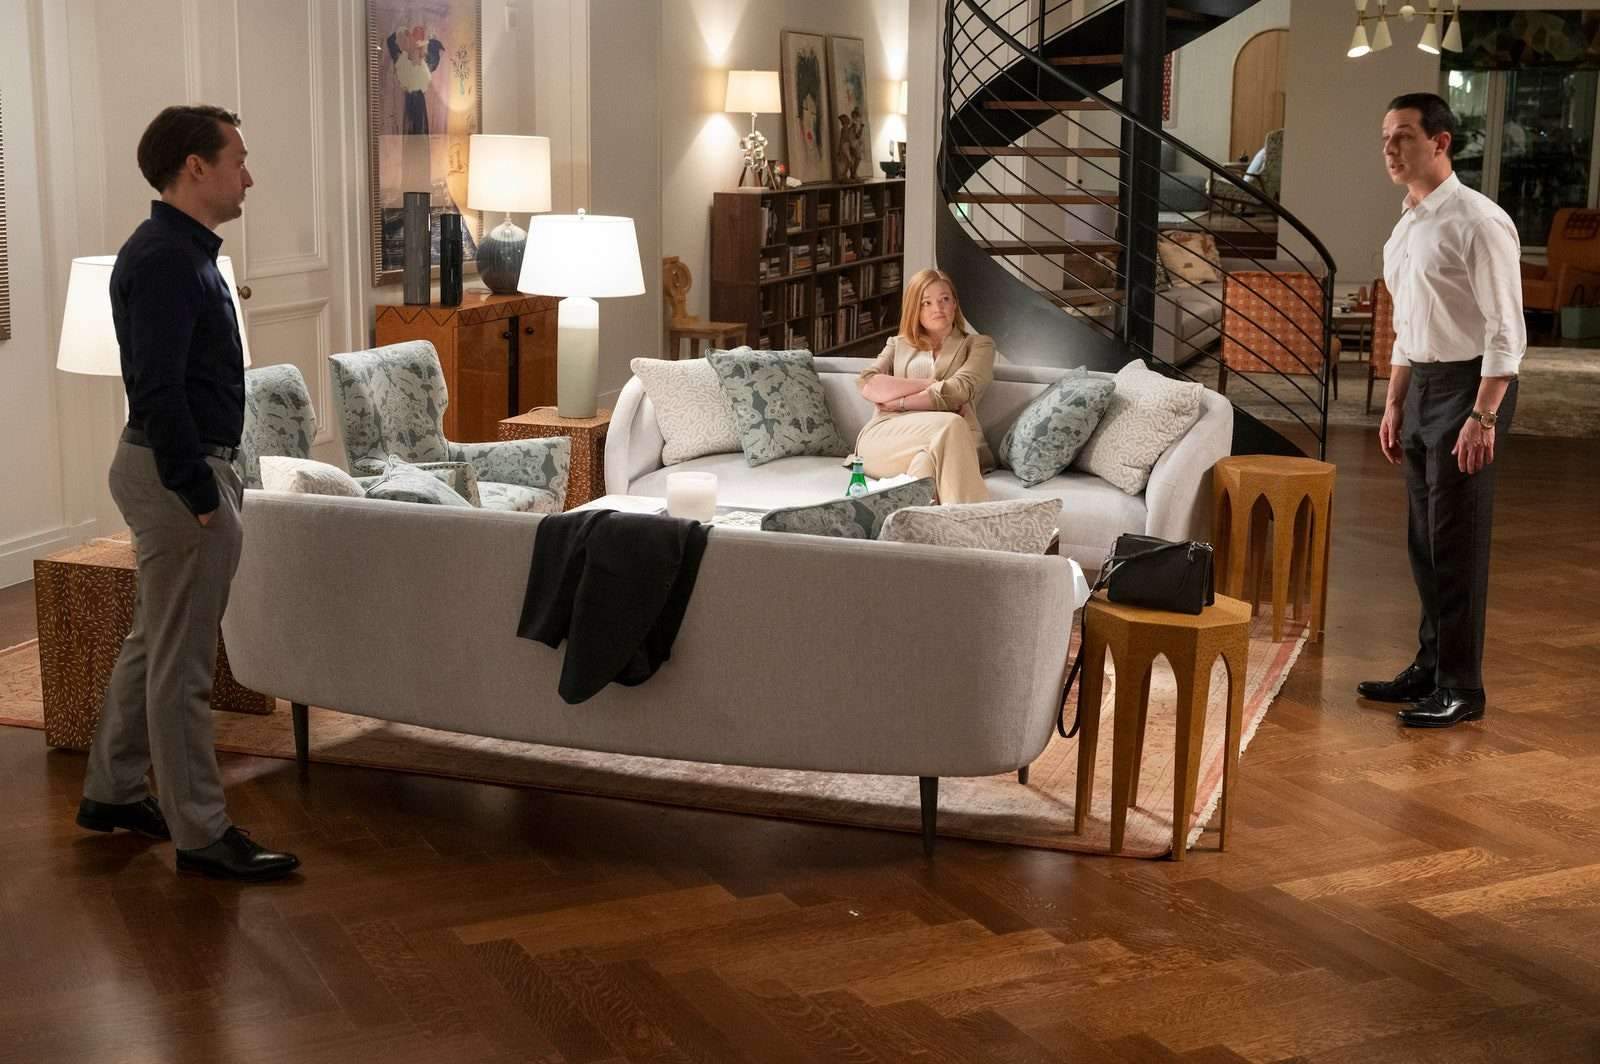 The Best Succession Interiors, Ranked